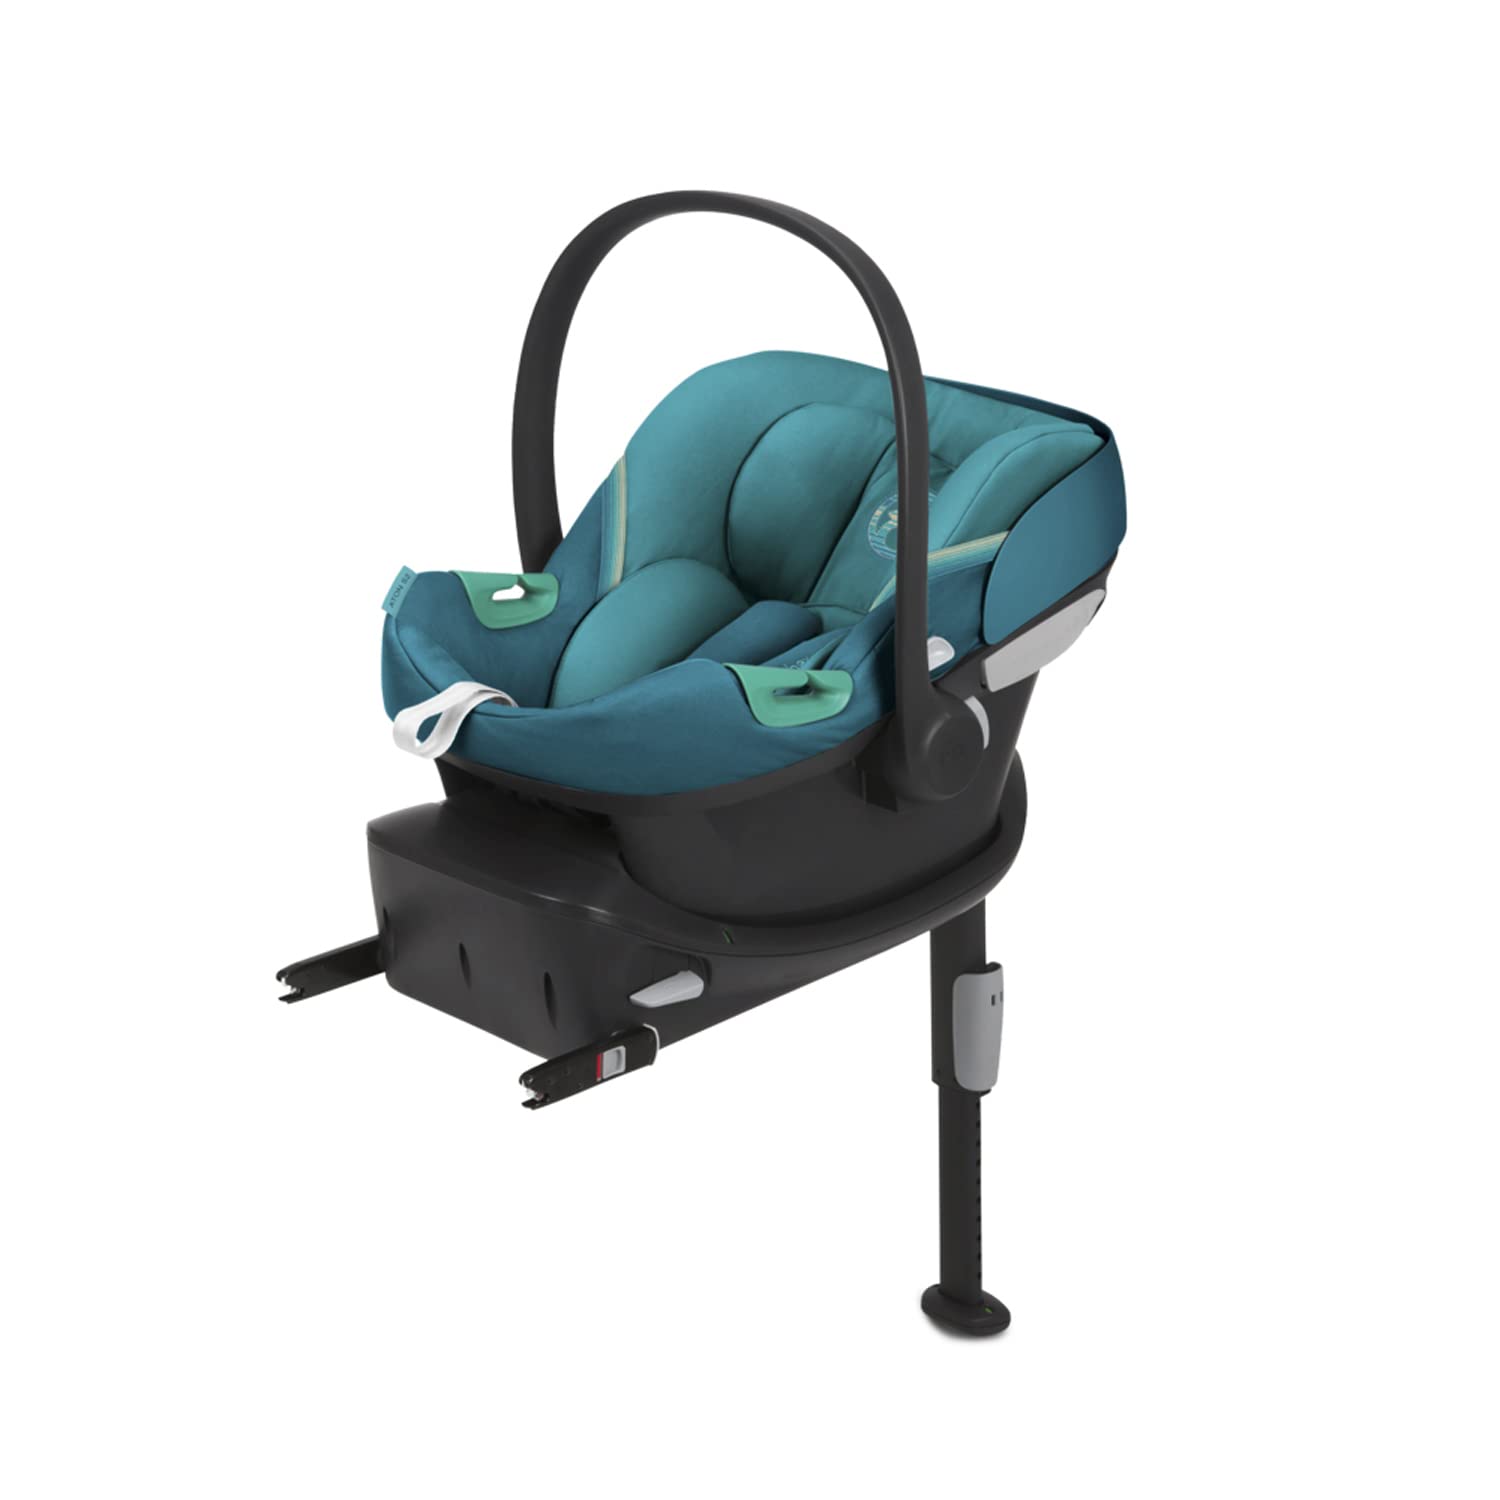 CYBEX Aton S2 i-Size Baby Car Seat from Birth to Approx. 24 Months, Max 13 kg, Includes Newborn Insert, SensorSafe Compatible, River Blue